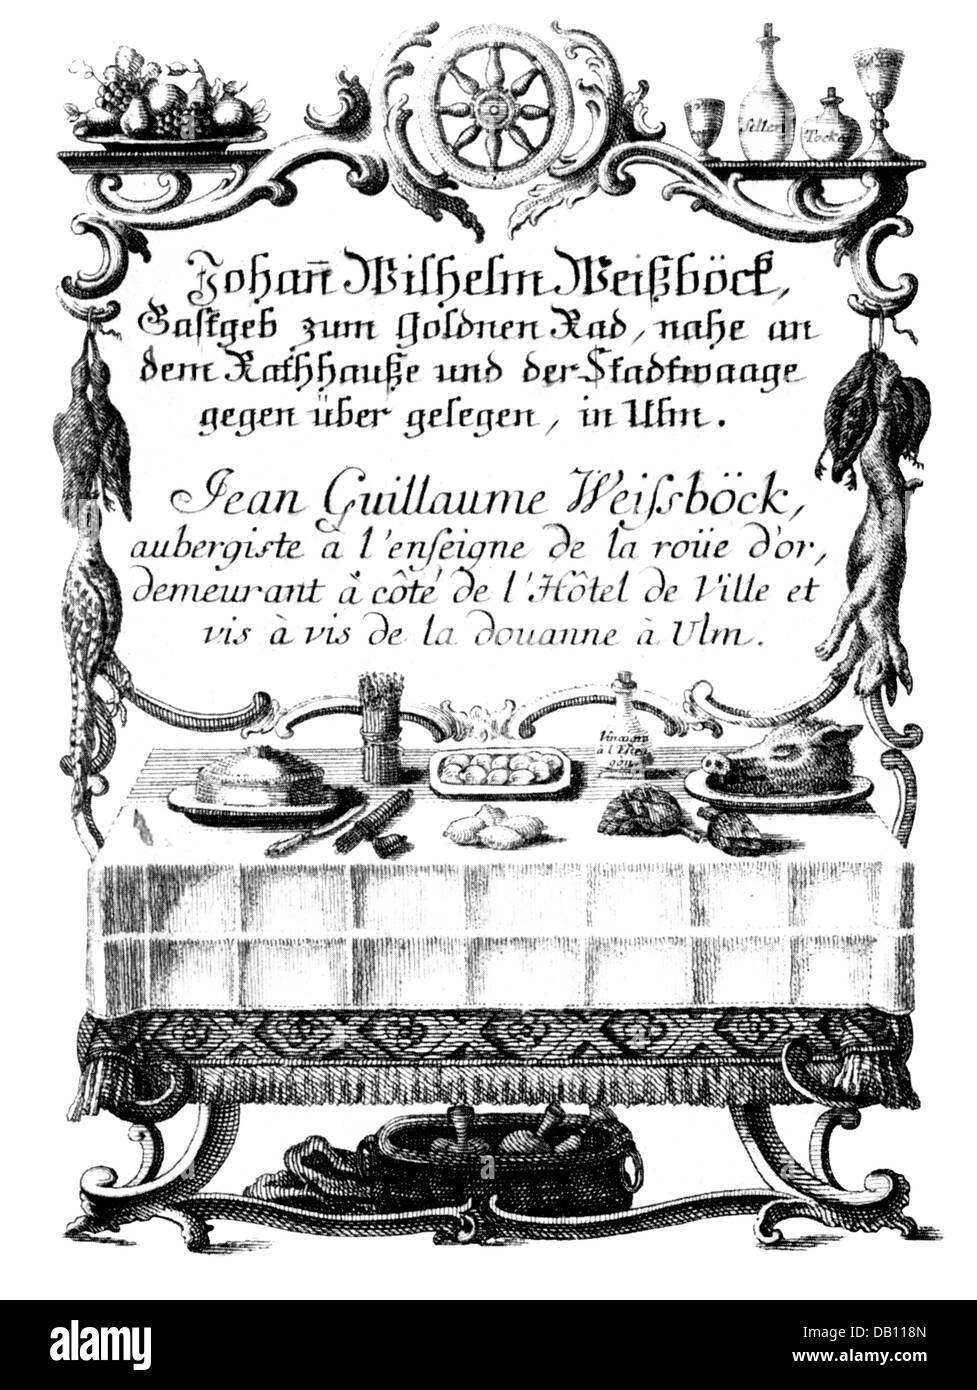 gastronomy, hotels, 'Goldenes Rad' in Ulm, promotional leaflet, engraving, circa 1800, Additional-Rights-Clearences-Not Available Stock Photo